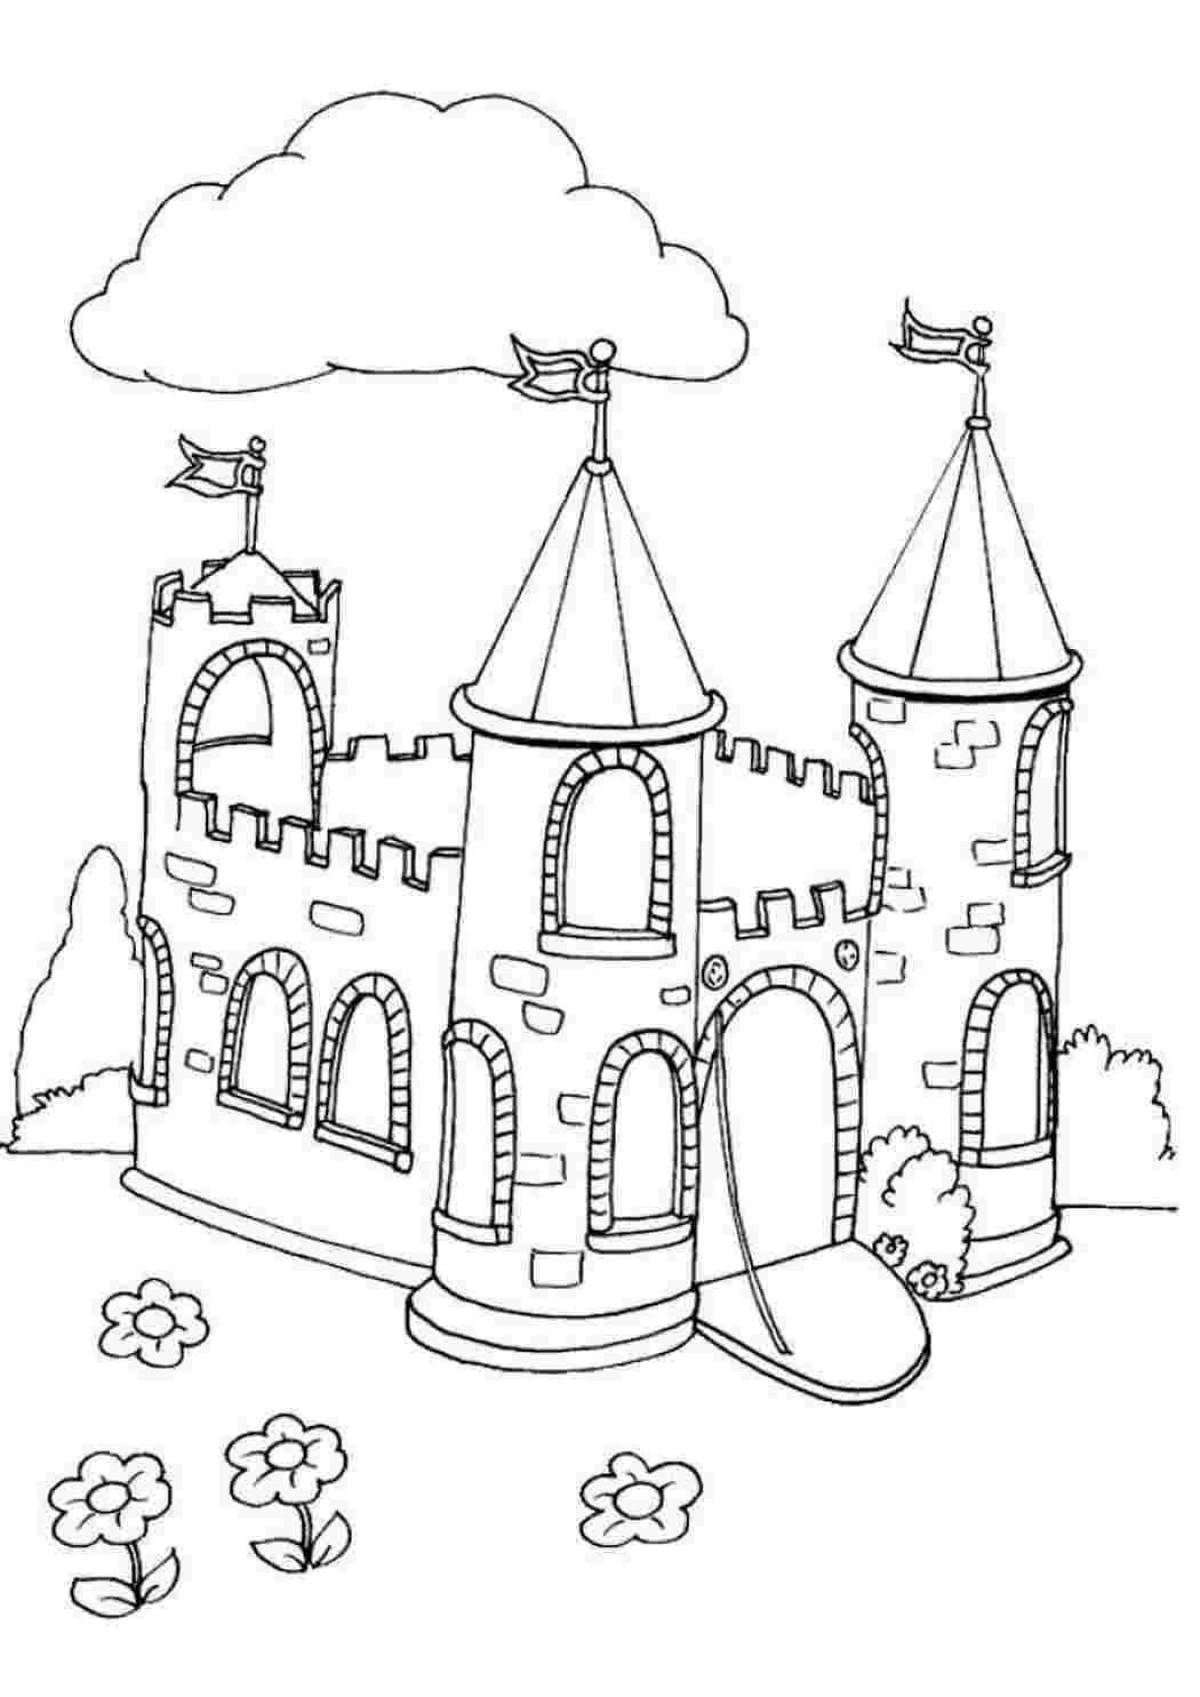 Great princess castle coloring book for kids